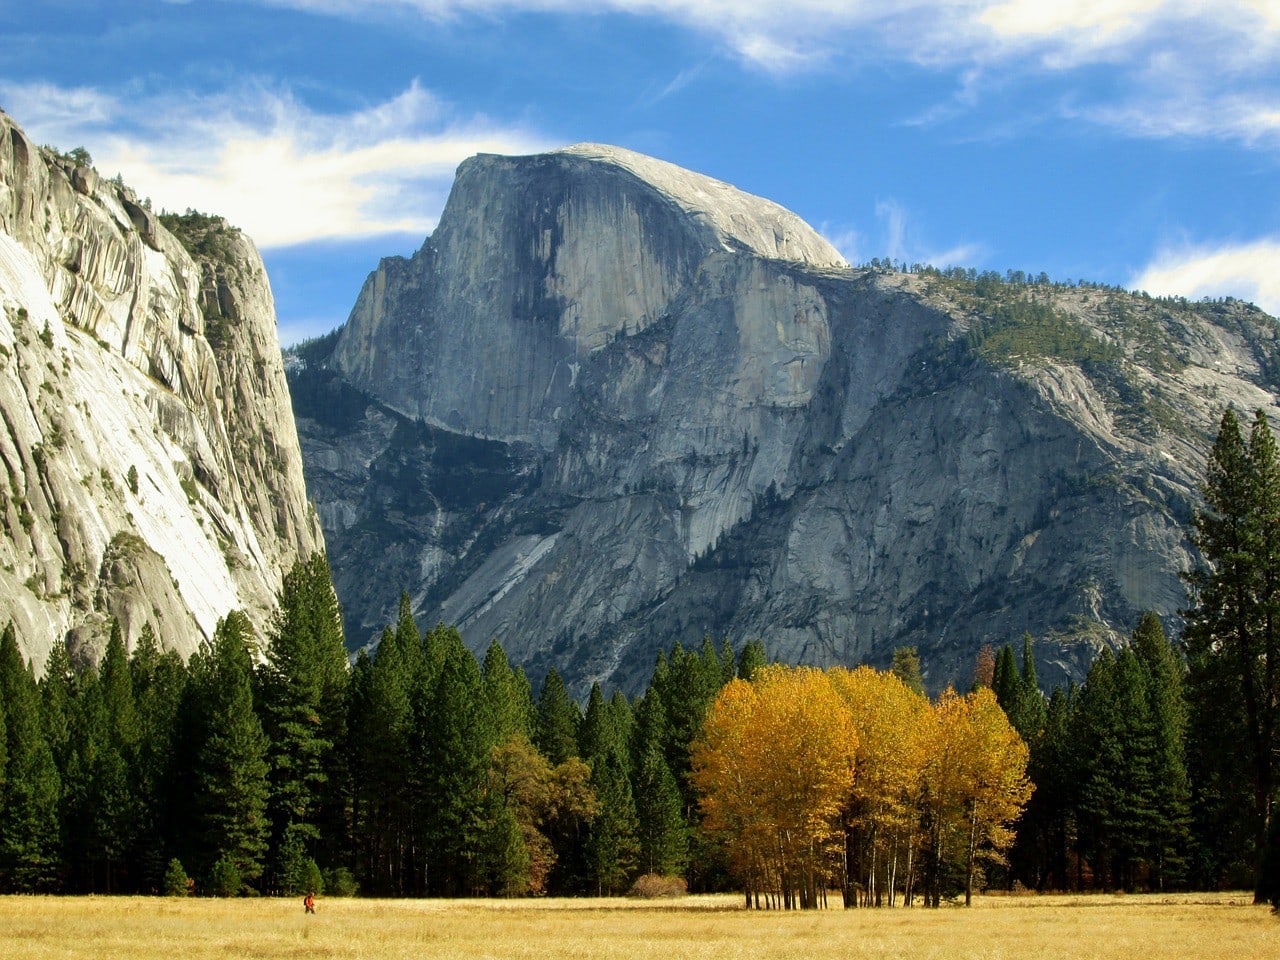 Best USA National Parks To Visit in the Fall